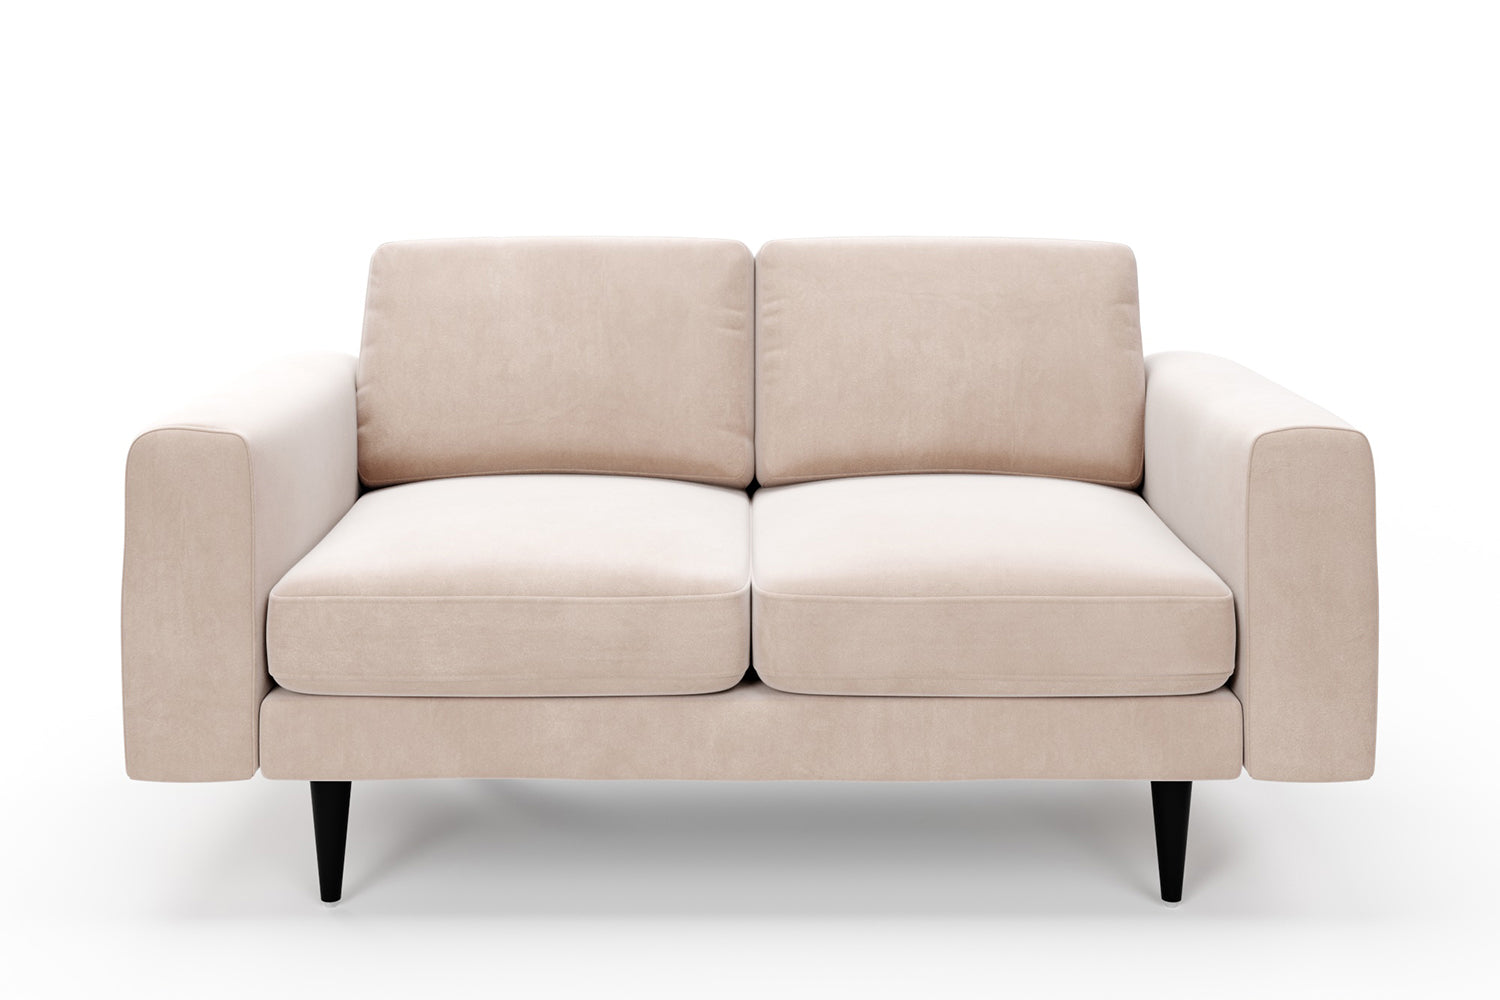 SNUG | The Big Chill 2 Seater Sofa in Taupe variant_40414877876272